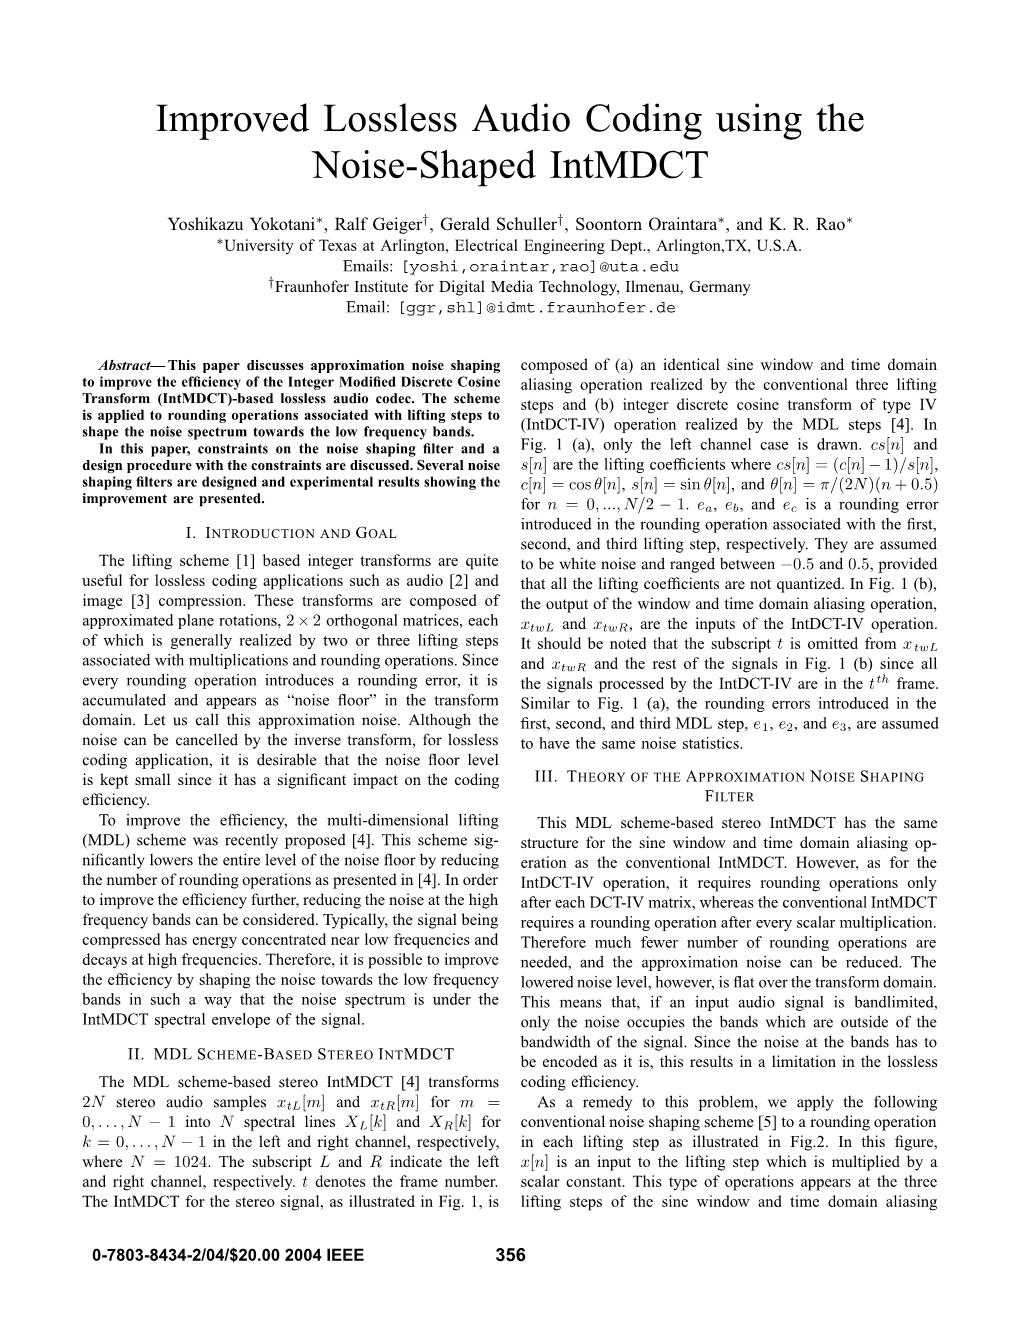 Improved Lossless Audio Coding Using the Noise-Shaped Intmdct